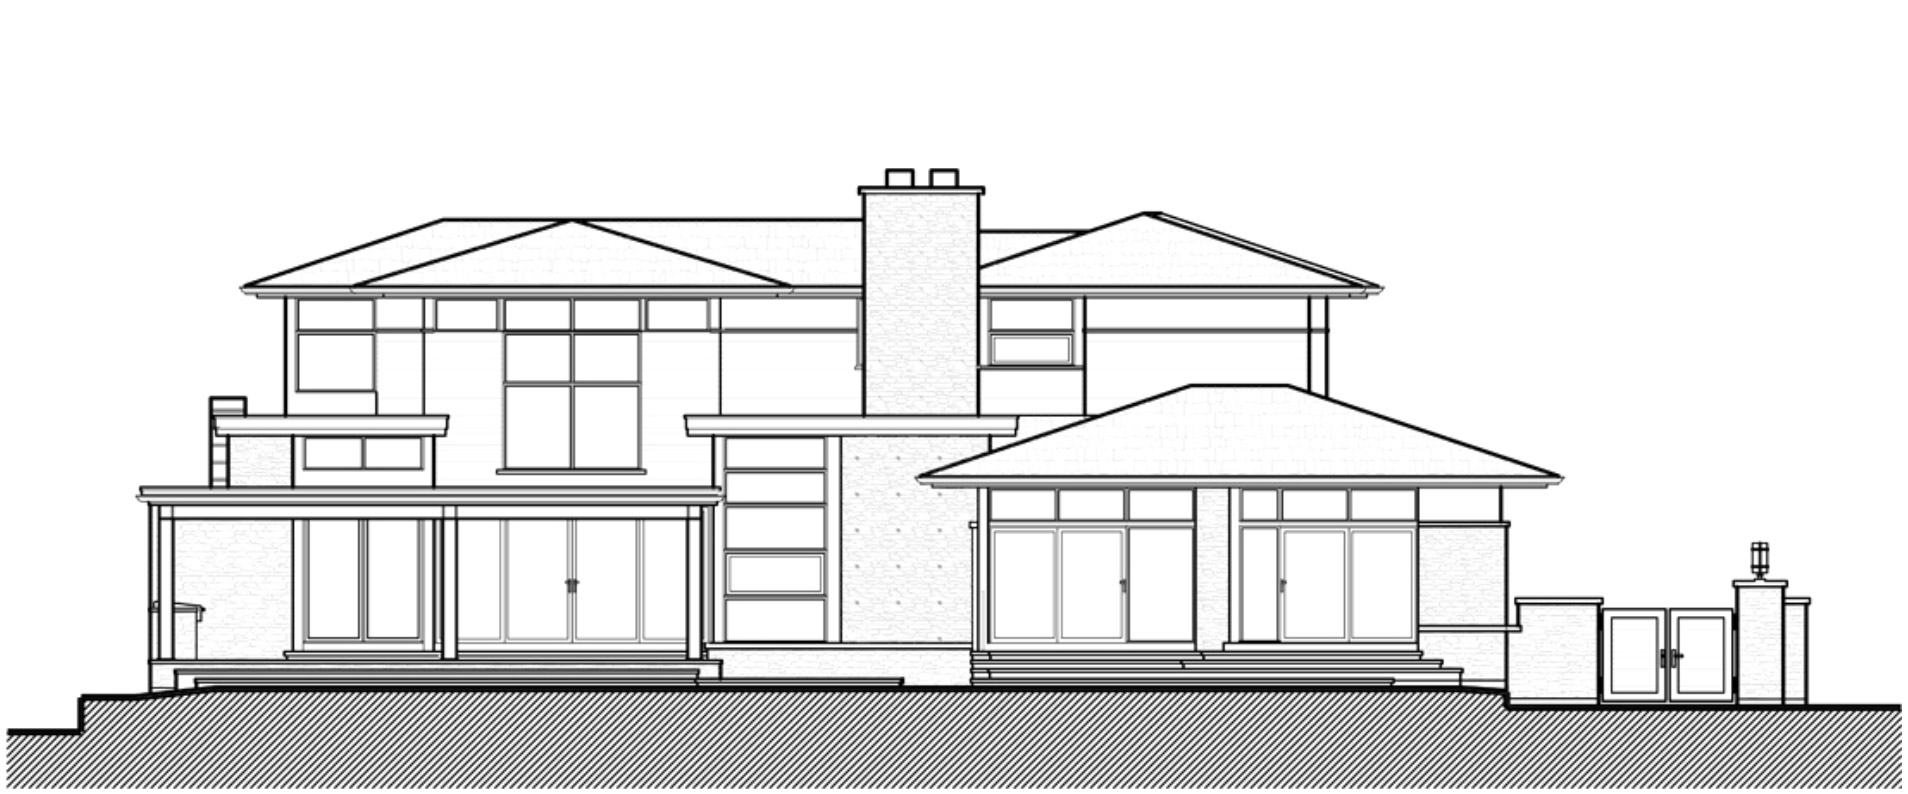 Front elevation drawings of custom home.